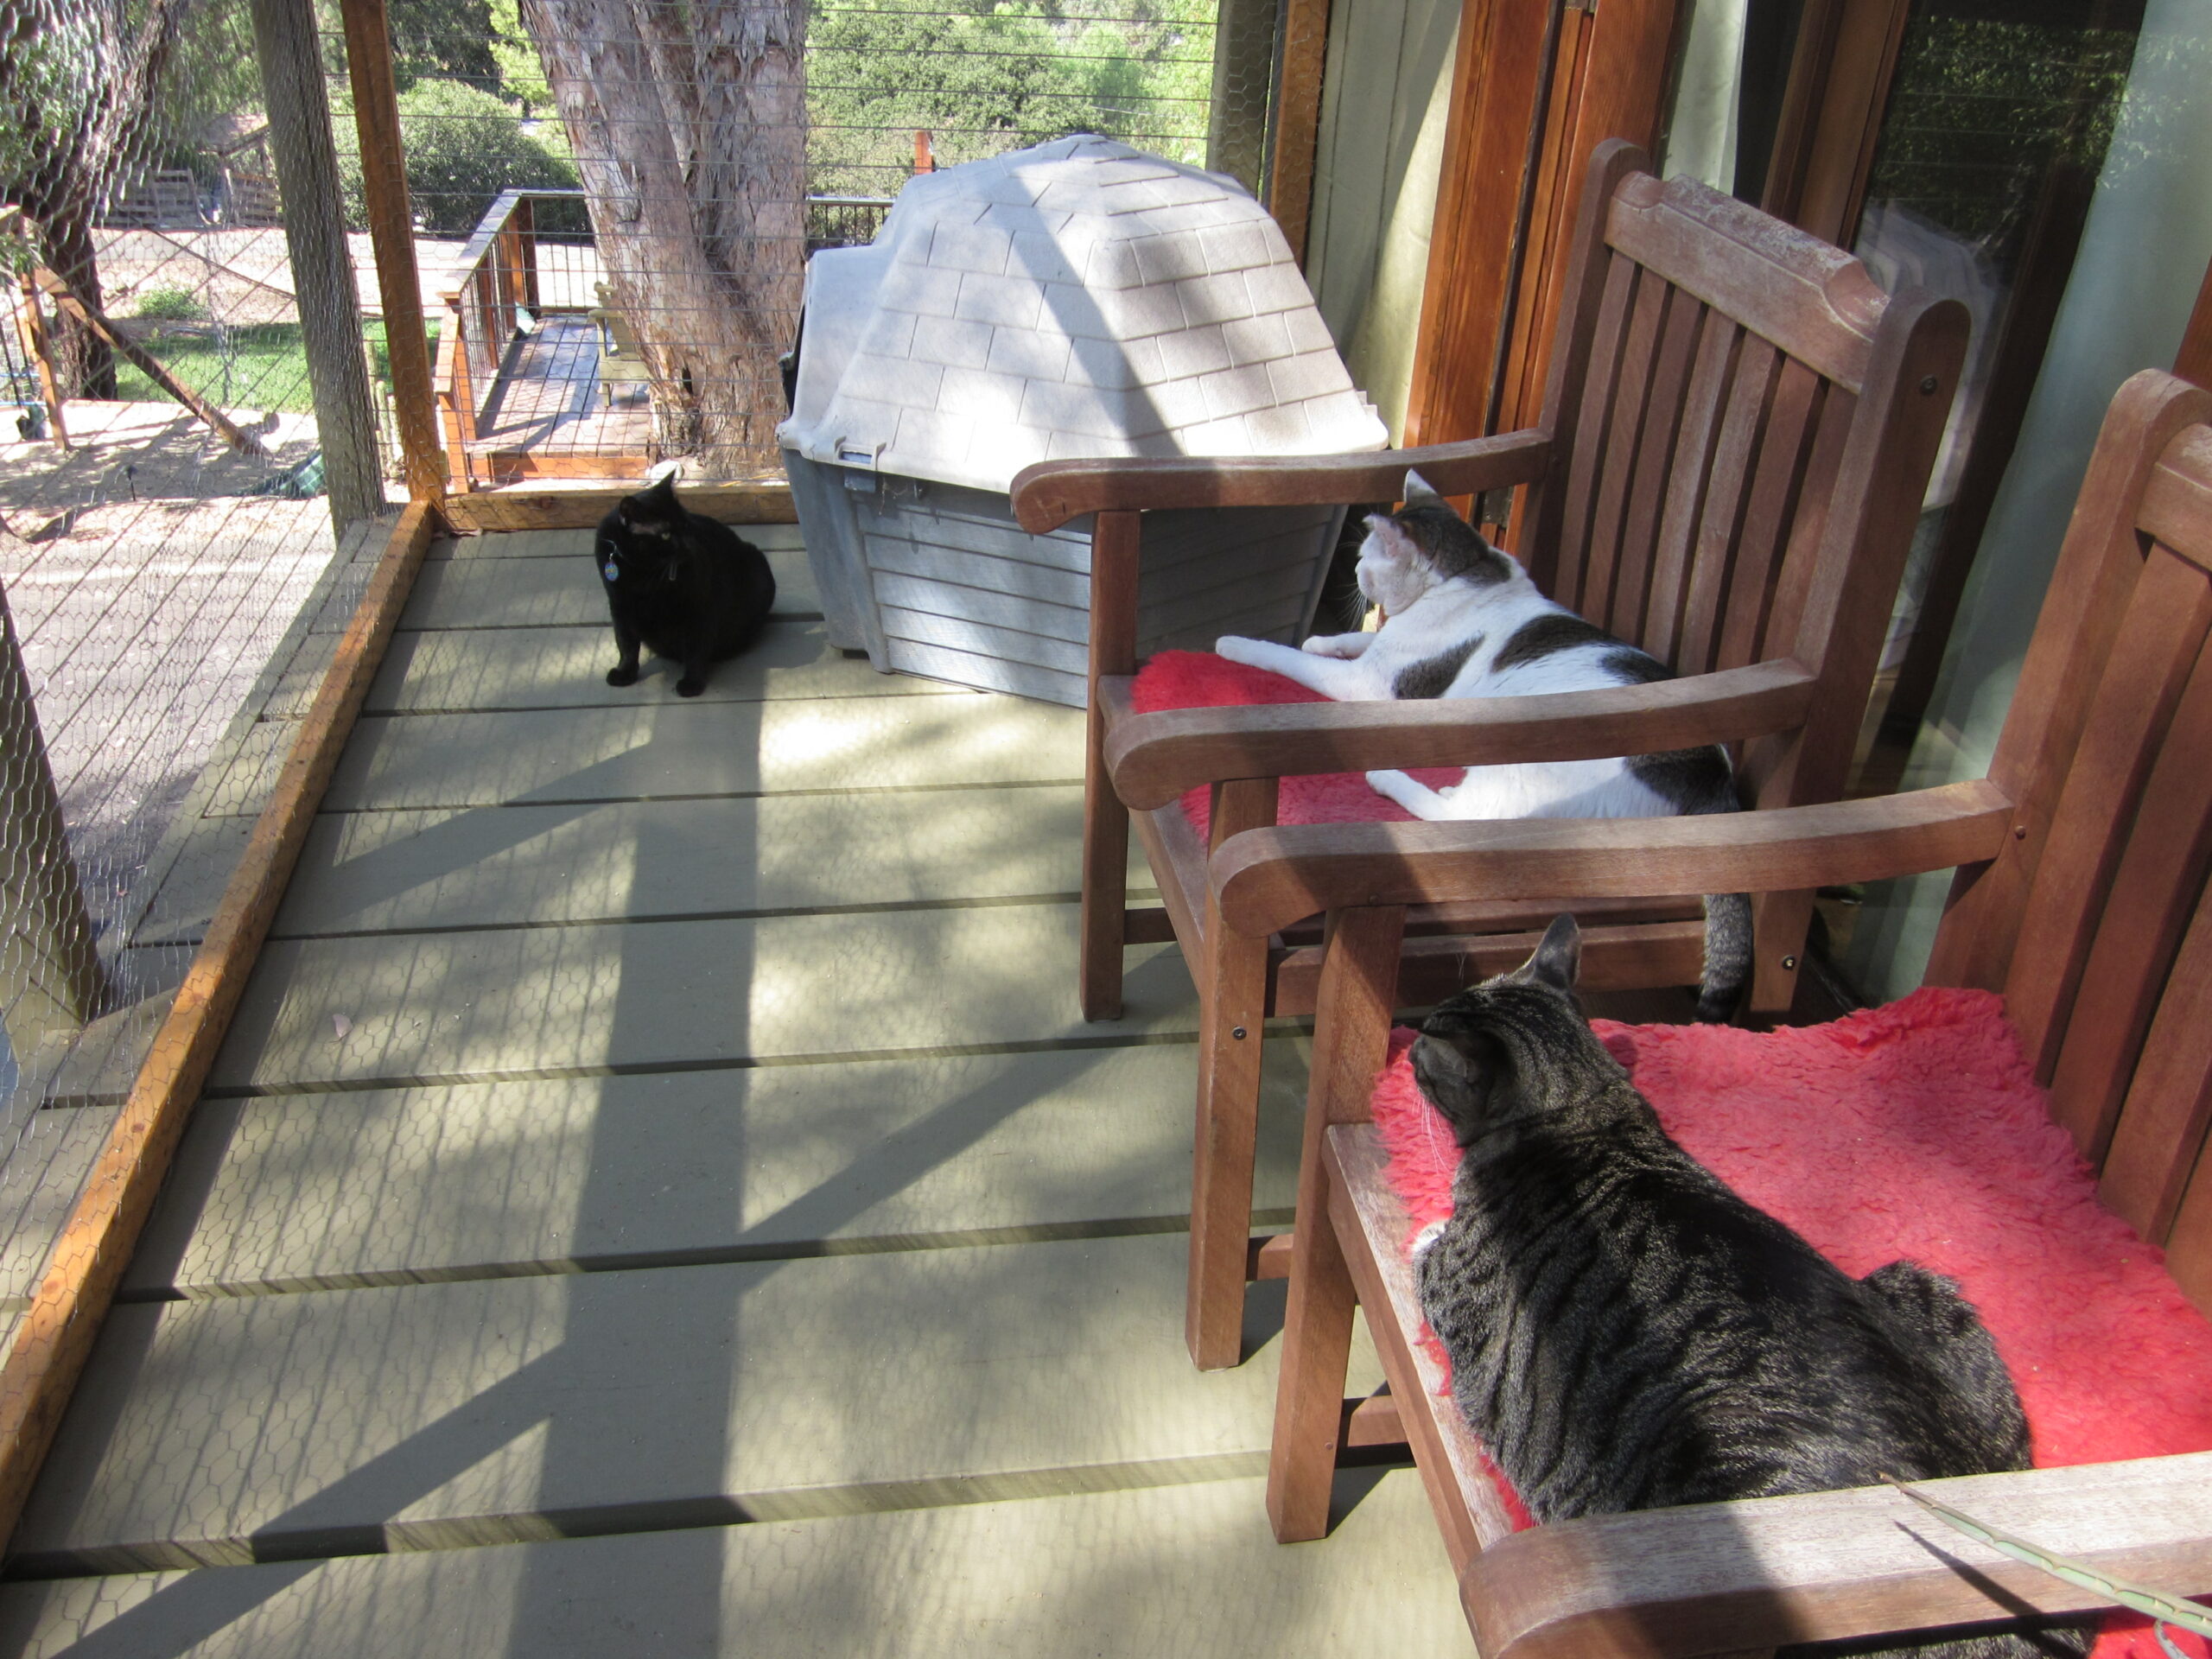 A "catio" is a good way to keep cats safe while giving them limited outdoor access